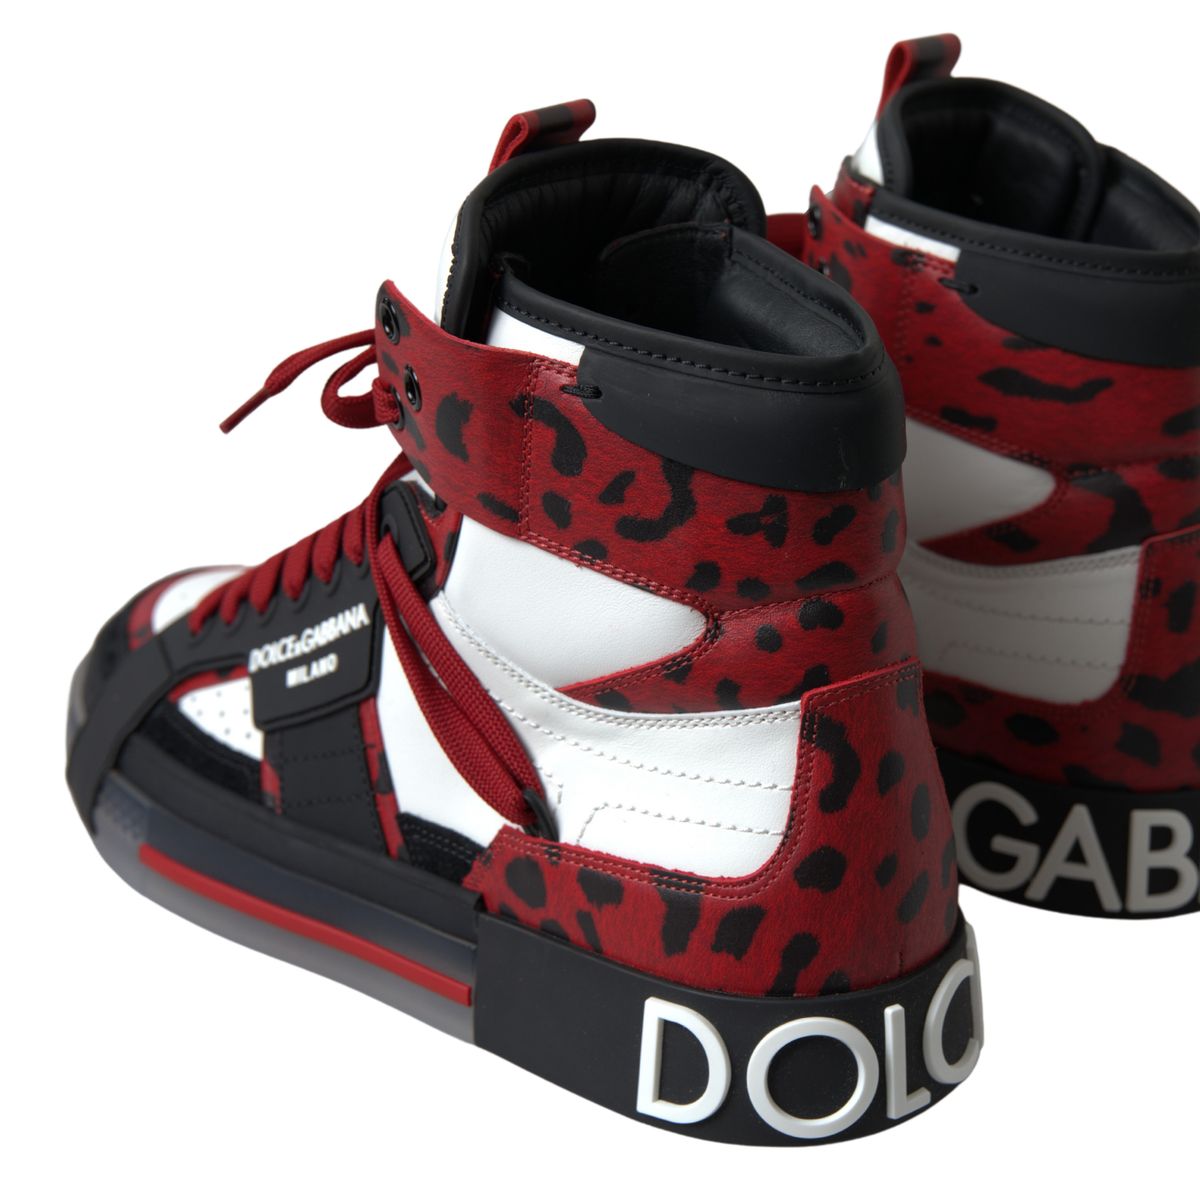 High-Top Leopard Sneakers in Lush Red Tones